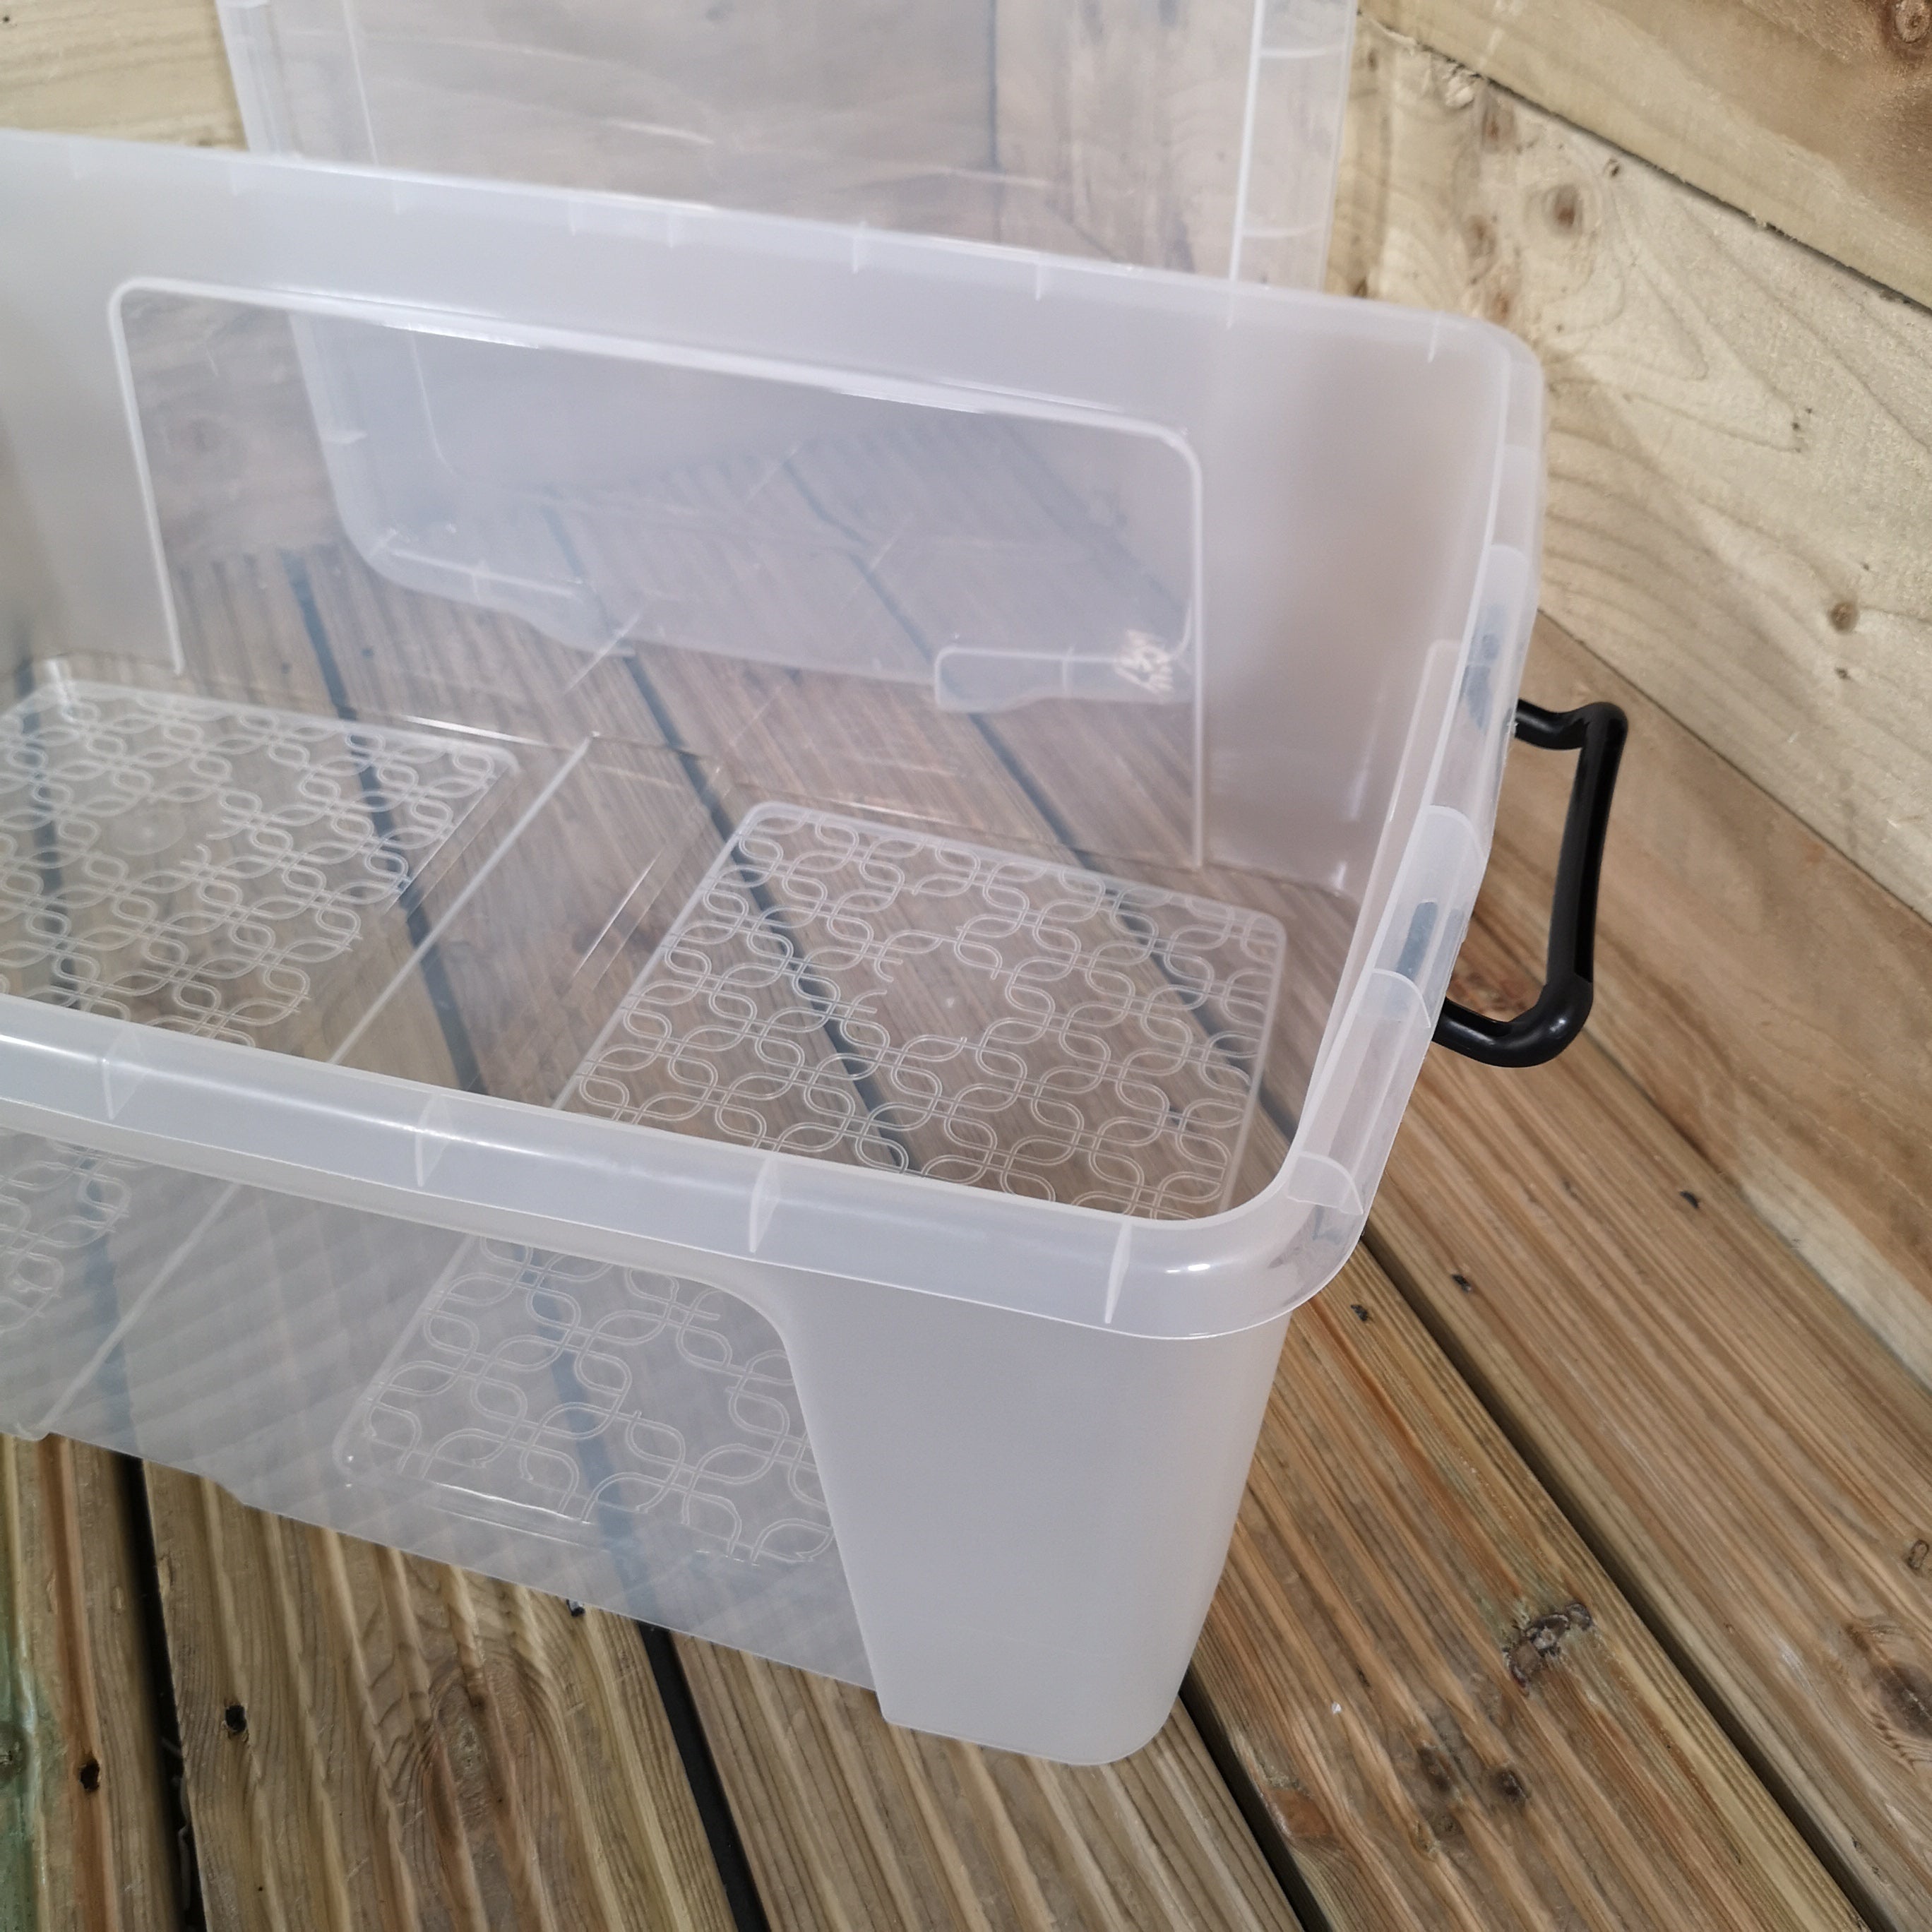 2 x 50L Smart Storage Boxes, Clear with Clear Extra Strong Lids, Stackable and Nestable Design Storage Solution